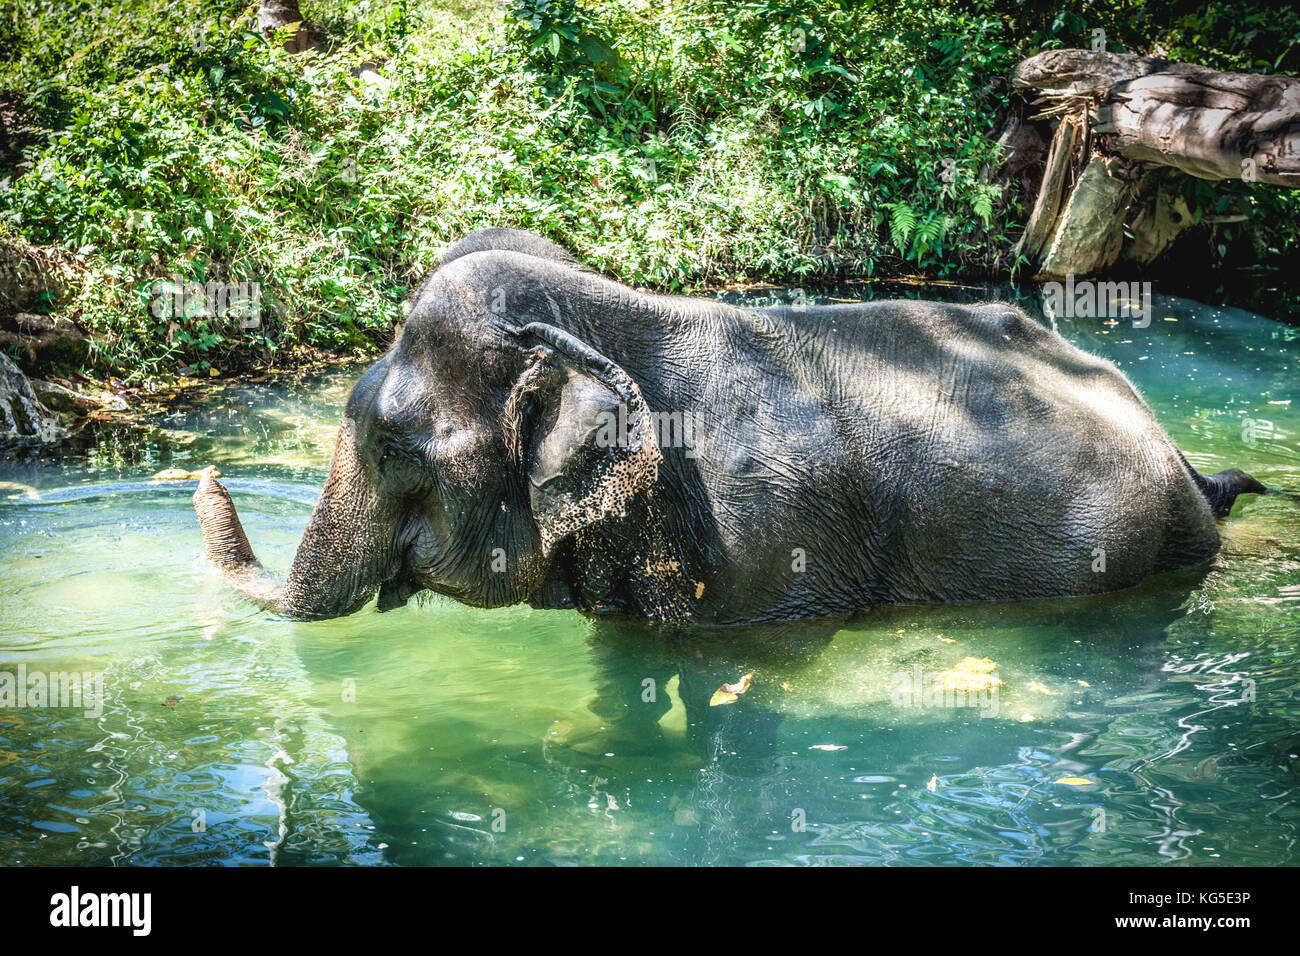 An adult Asian or Asiatic Elephant (Elephas maximus) bathing in a river in the jungles of Thailand Stock Photo